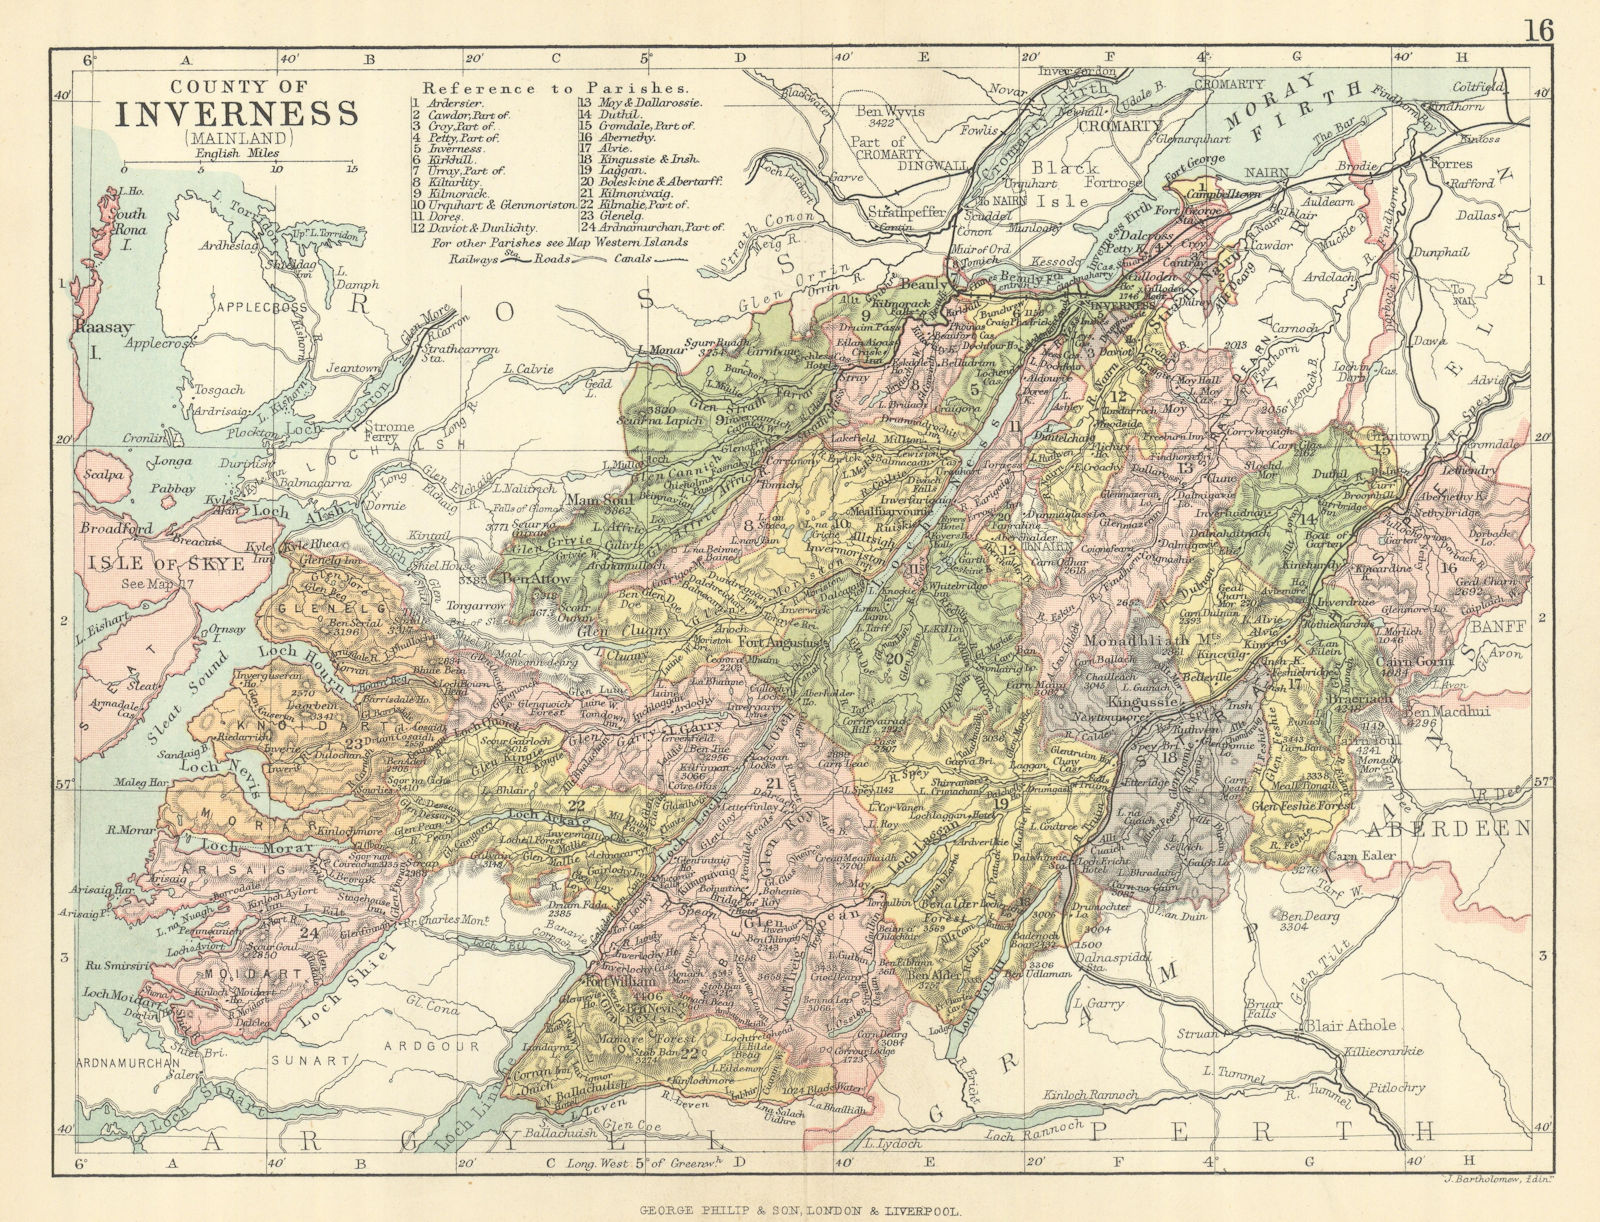 Associate Product 'County of Inverness (Mainland)' Inverness-shire. Parishes. BARTHOLOMEW 1886 map